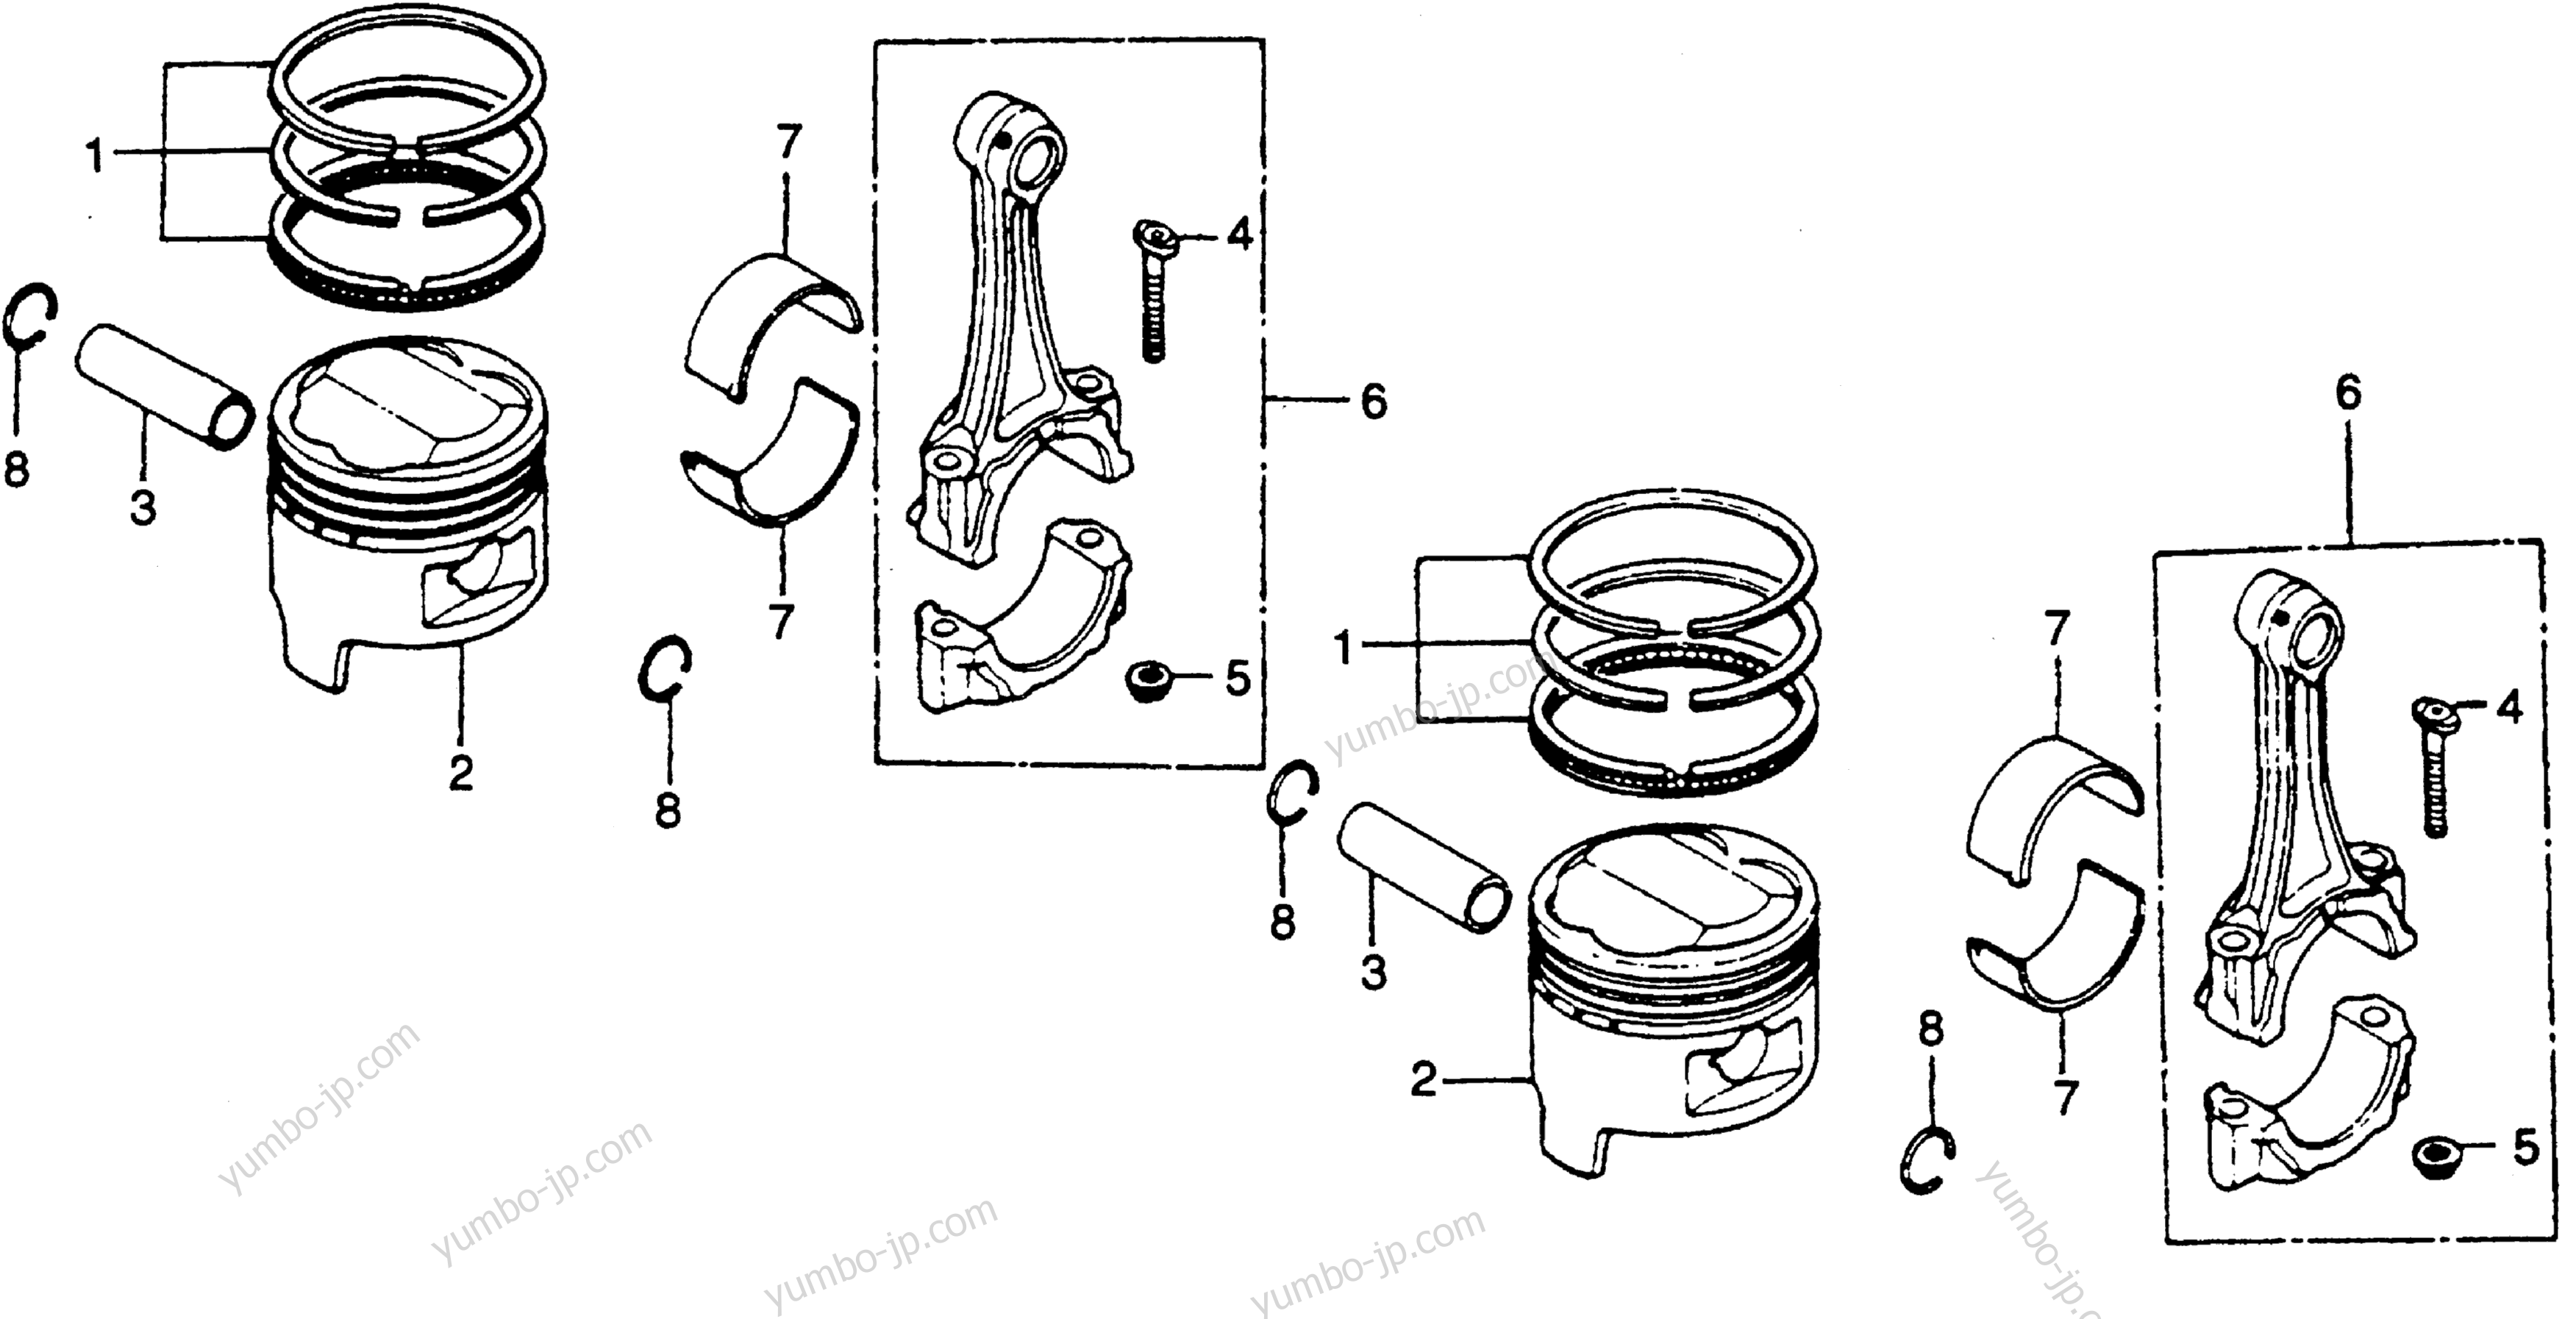 PISTON / CONNECTING ROD for motorcycles HONDA CB400TI A 1978 year